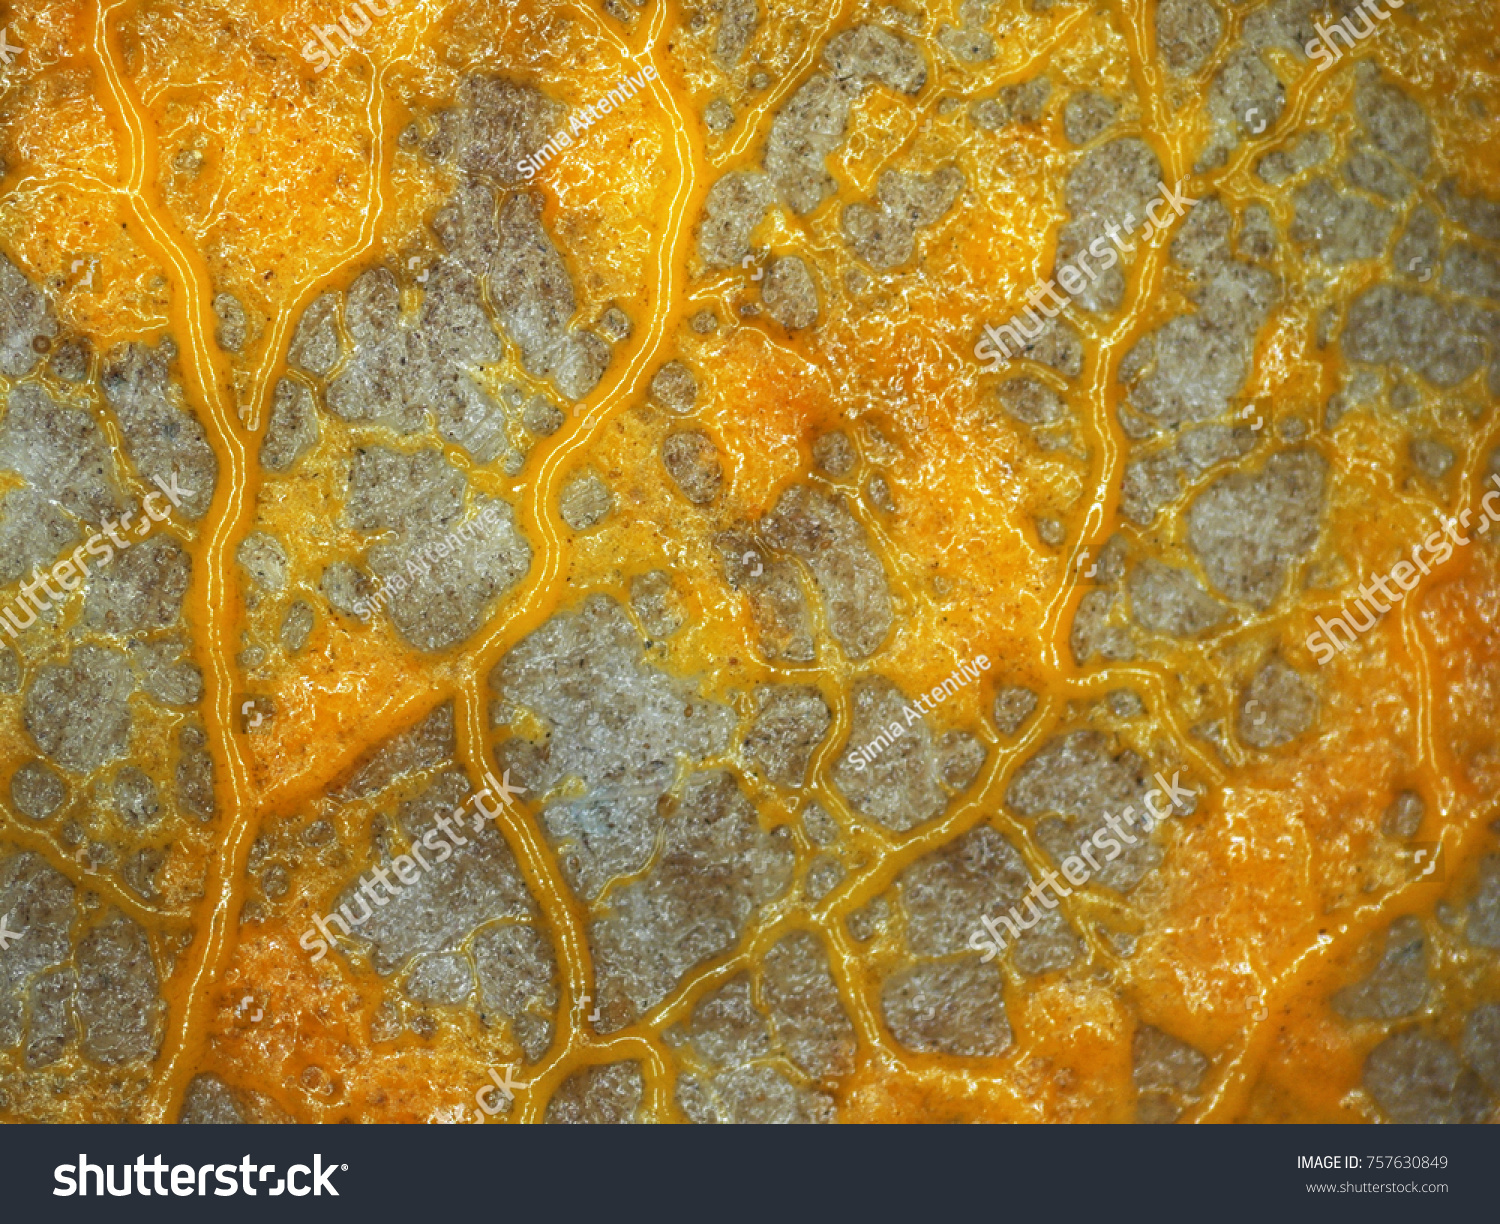 A veiny yellow plasmodium of a Physarum slime mold, or myxomycete, is crawling and moving on a substrate. Slime moulds are special organisms that gather from many microscopic unicellular amoebae #757630849